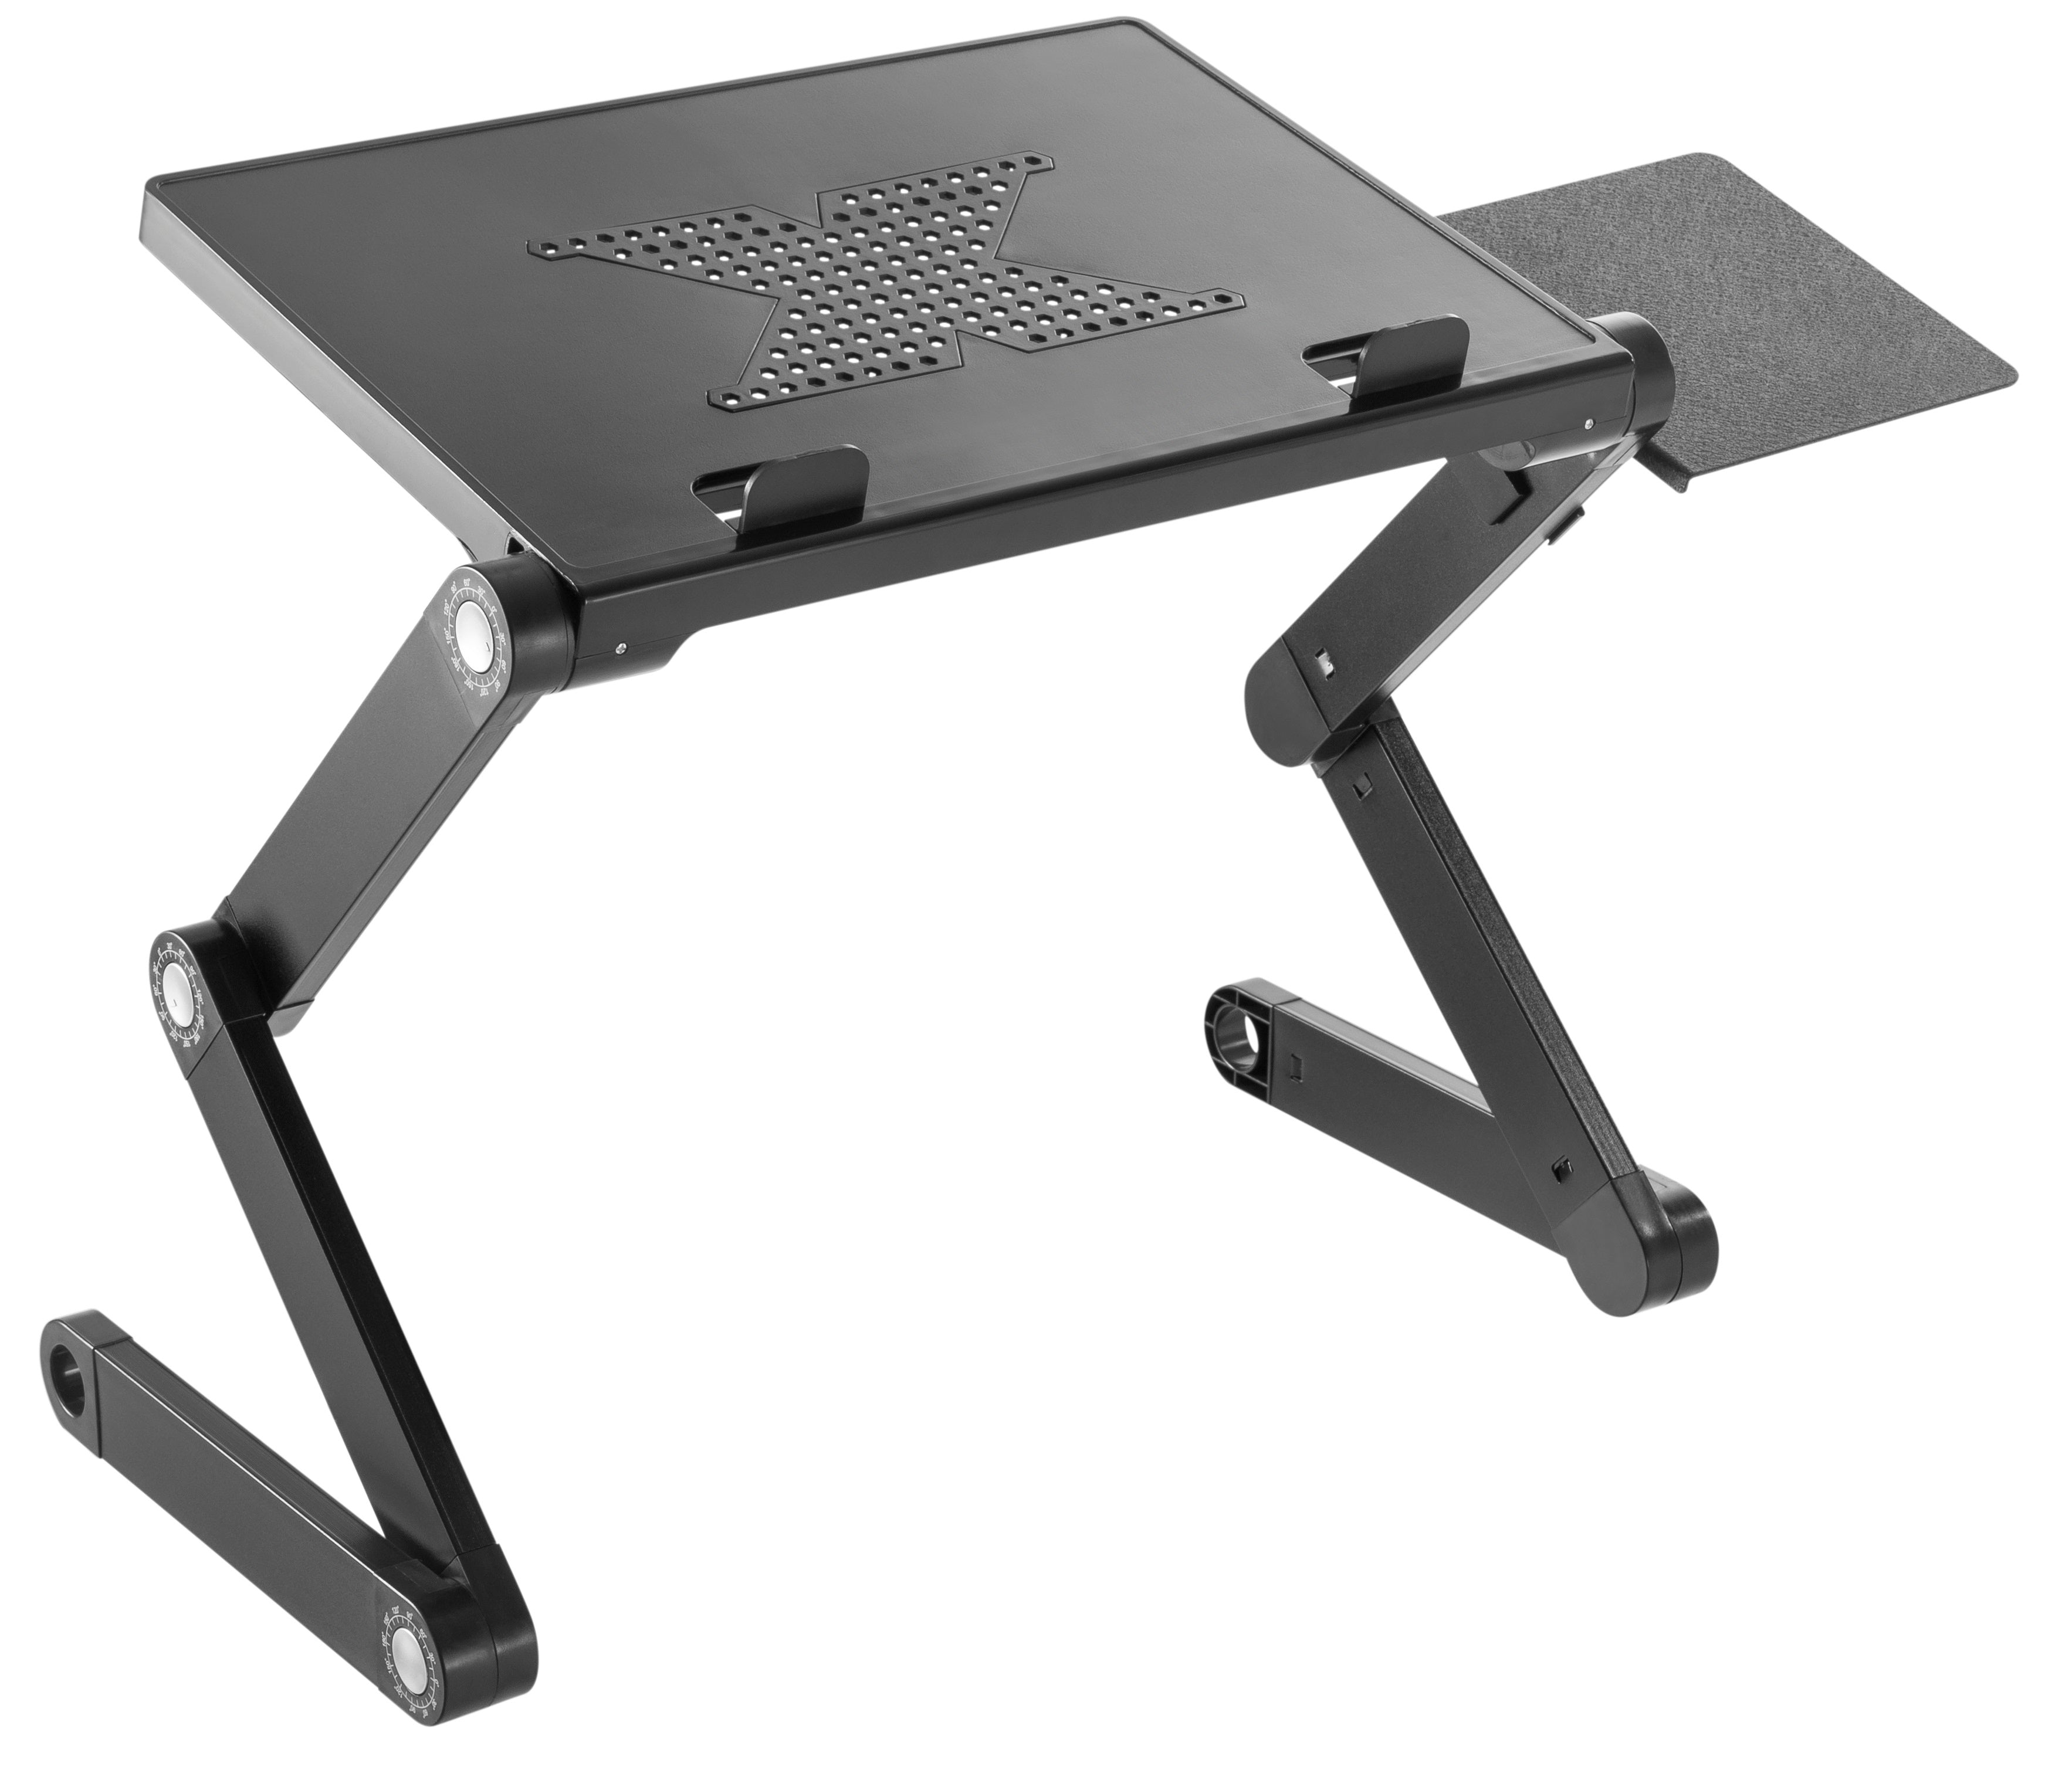 ProperAV Laptop, Tablet or Monitor Riser Stand with Extending Legs & Mouse Pad Side Mount - Black